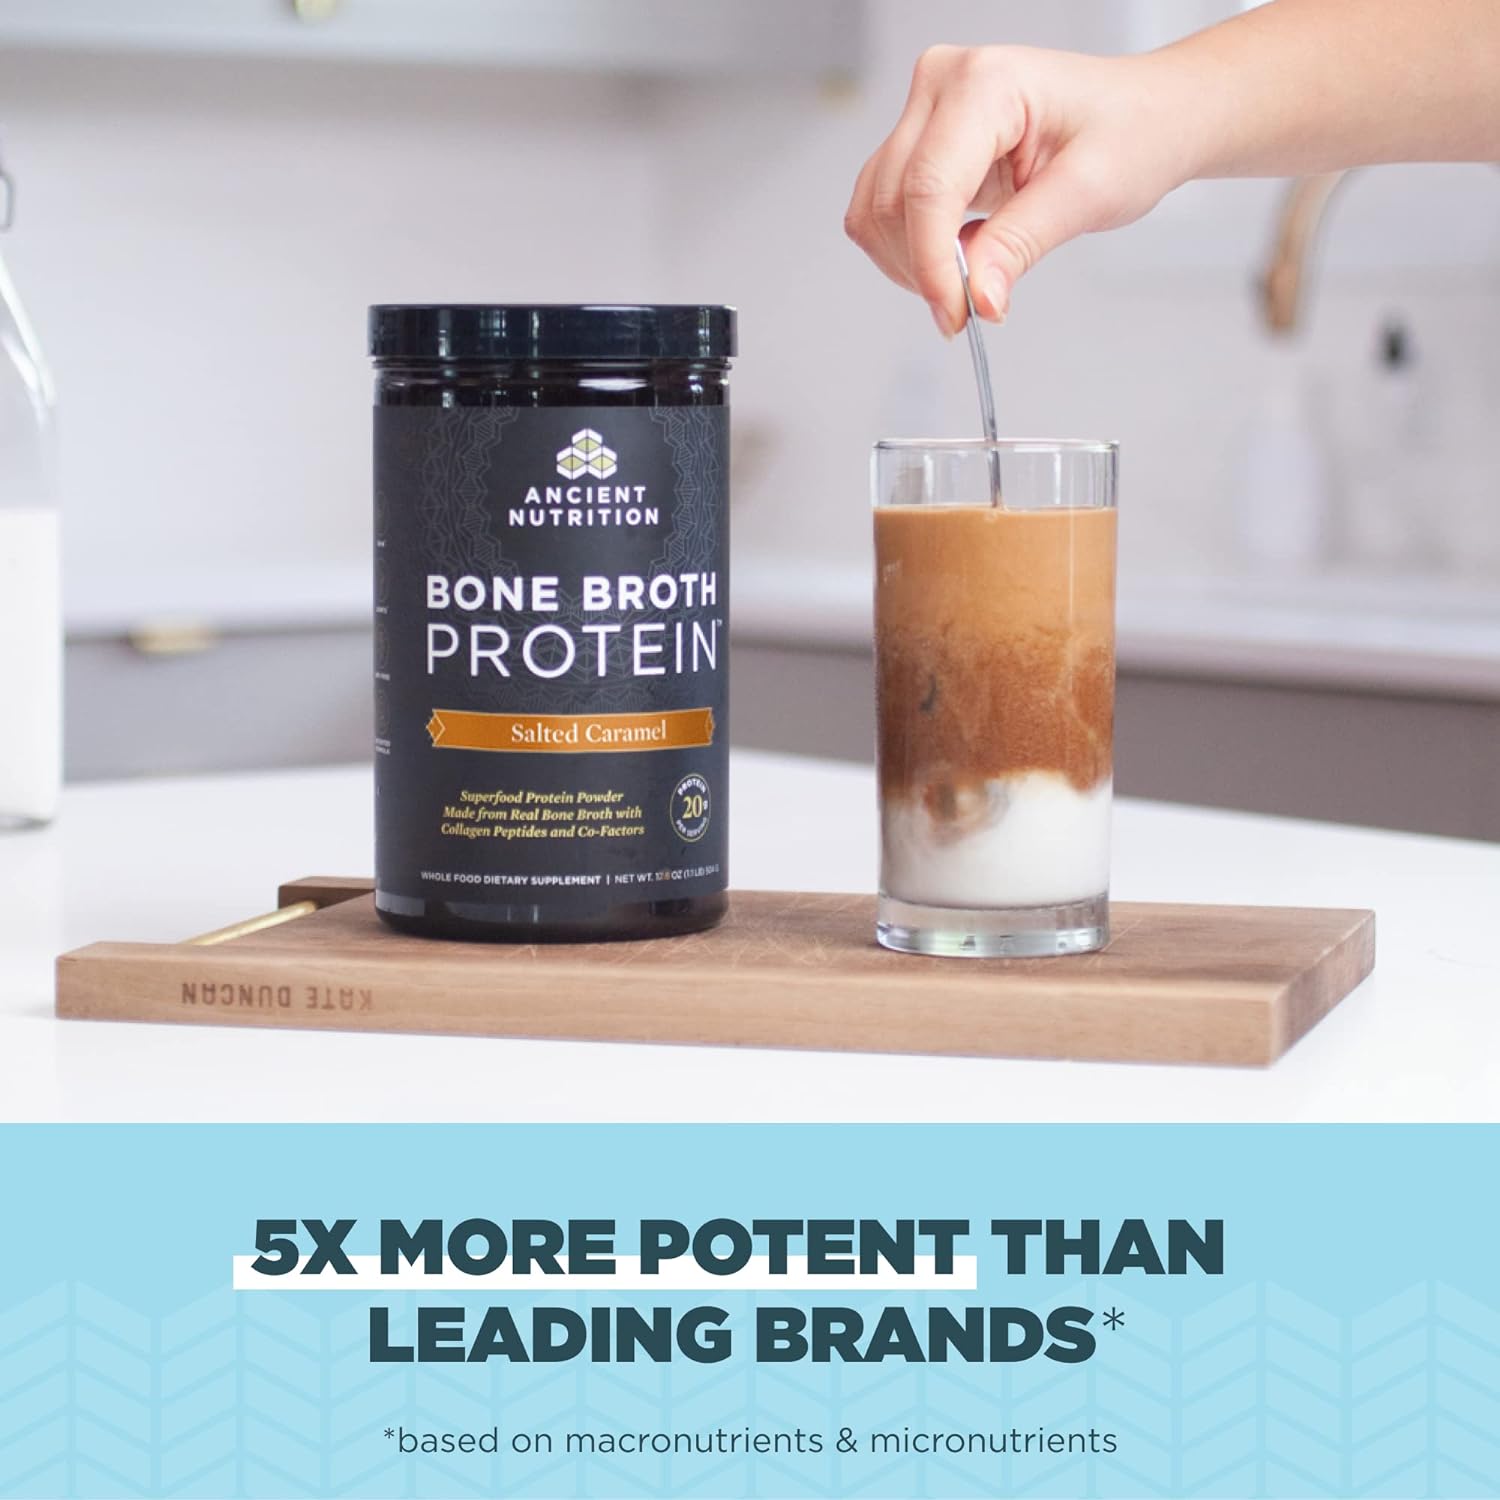 Ancient Nutrition Bone Broth Protein Powder, Salted Caramel, 19g Prote